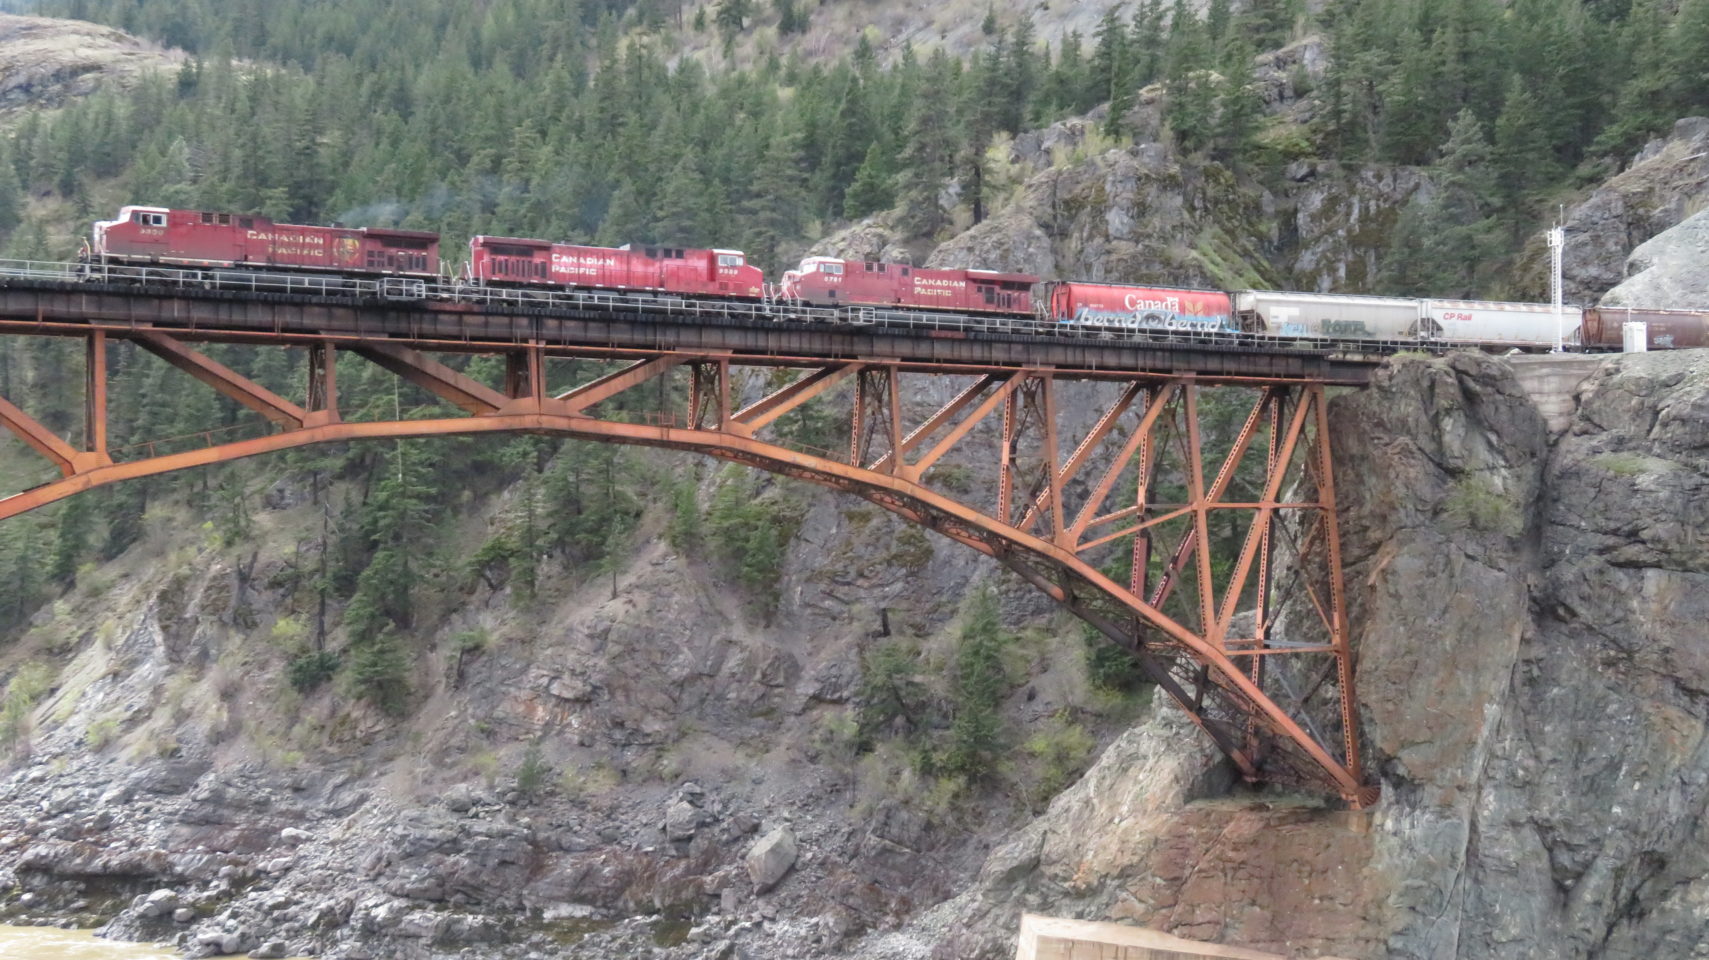 Imagine the heroism required to build this bridge ! Rocky Mountaineer ~ The Trip of a Lifetime ...